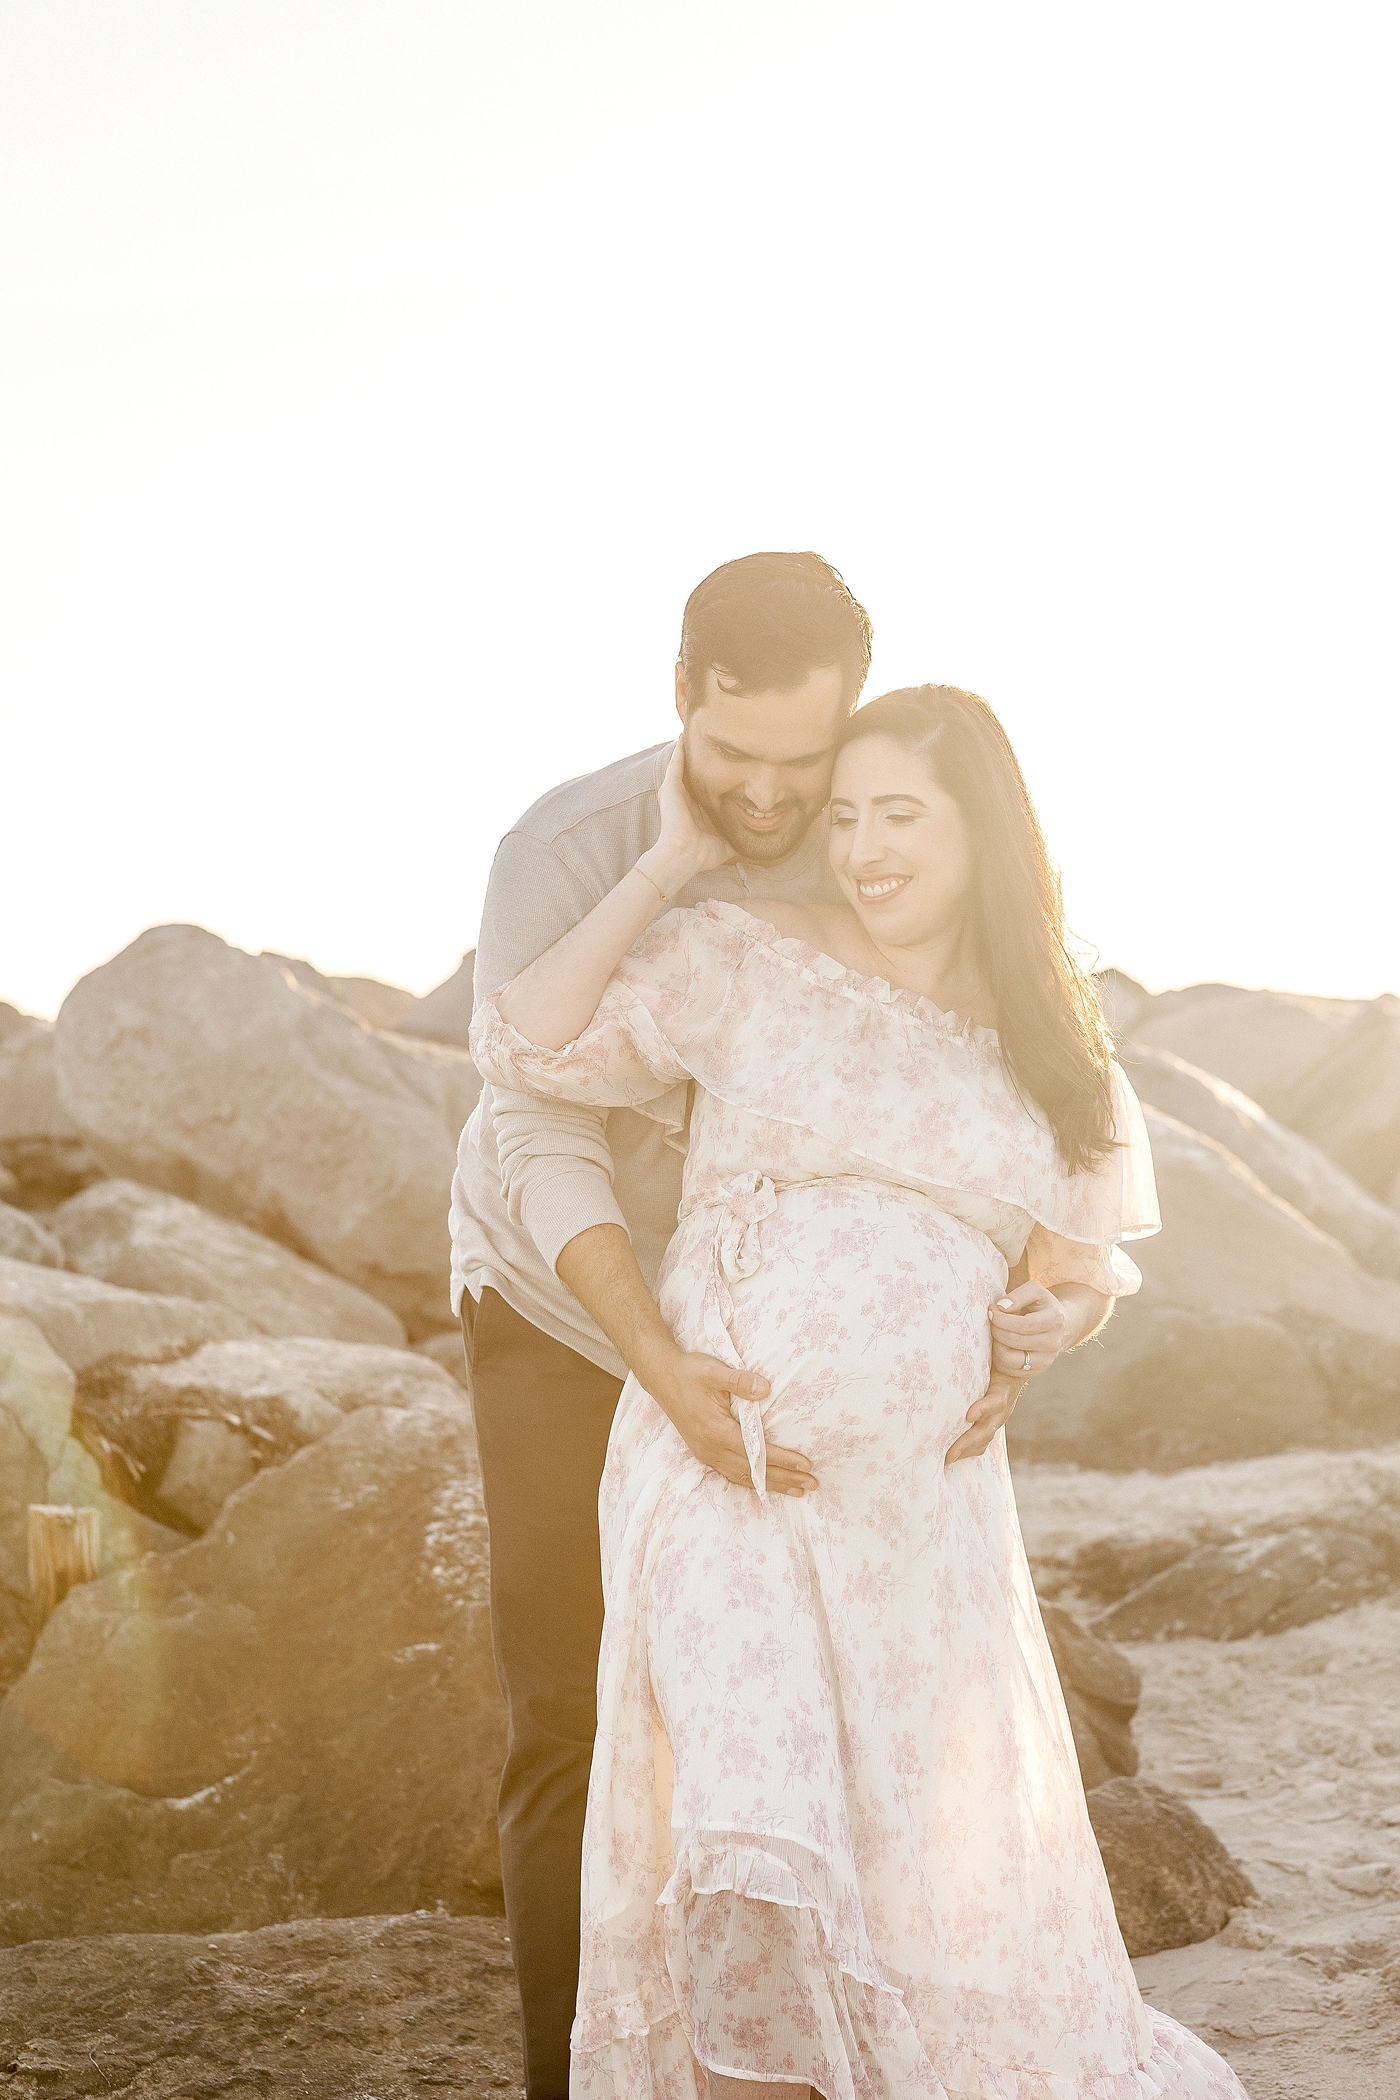 Expectant parents to be embrace one another in front of rocks during maternity session at El Farito Beach Miami FL. Photo by Ivanna Vidal Photography.